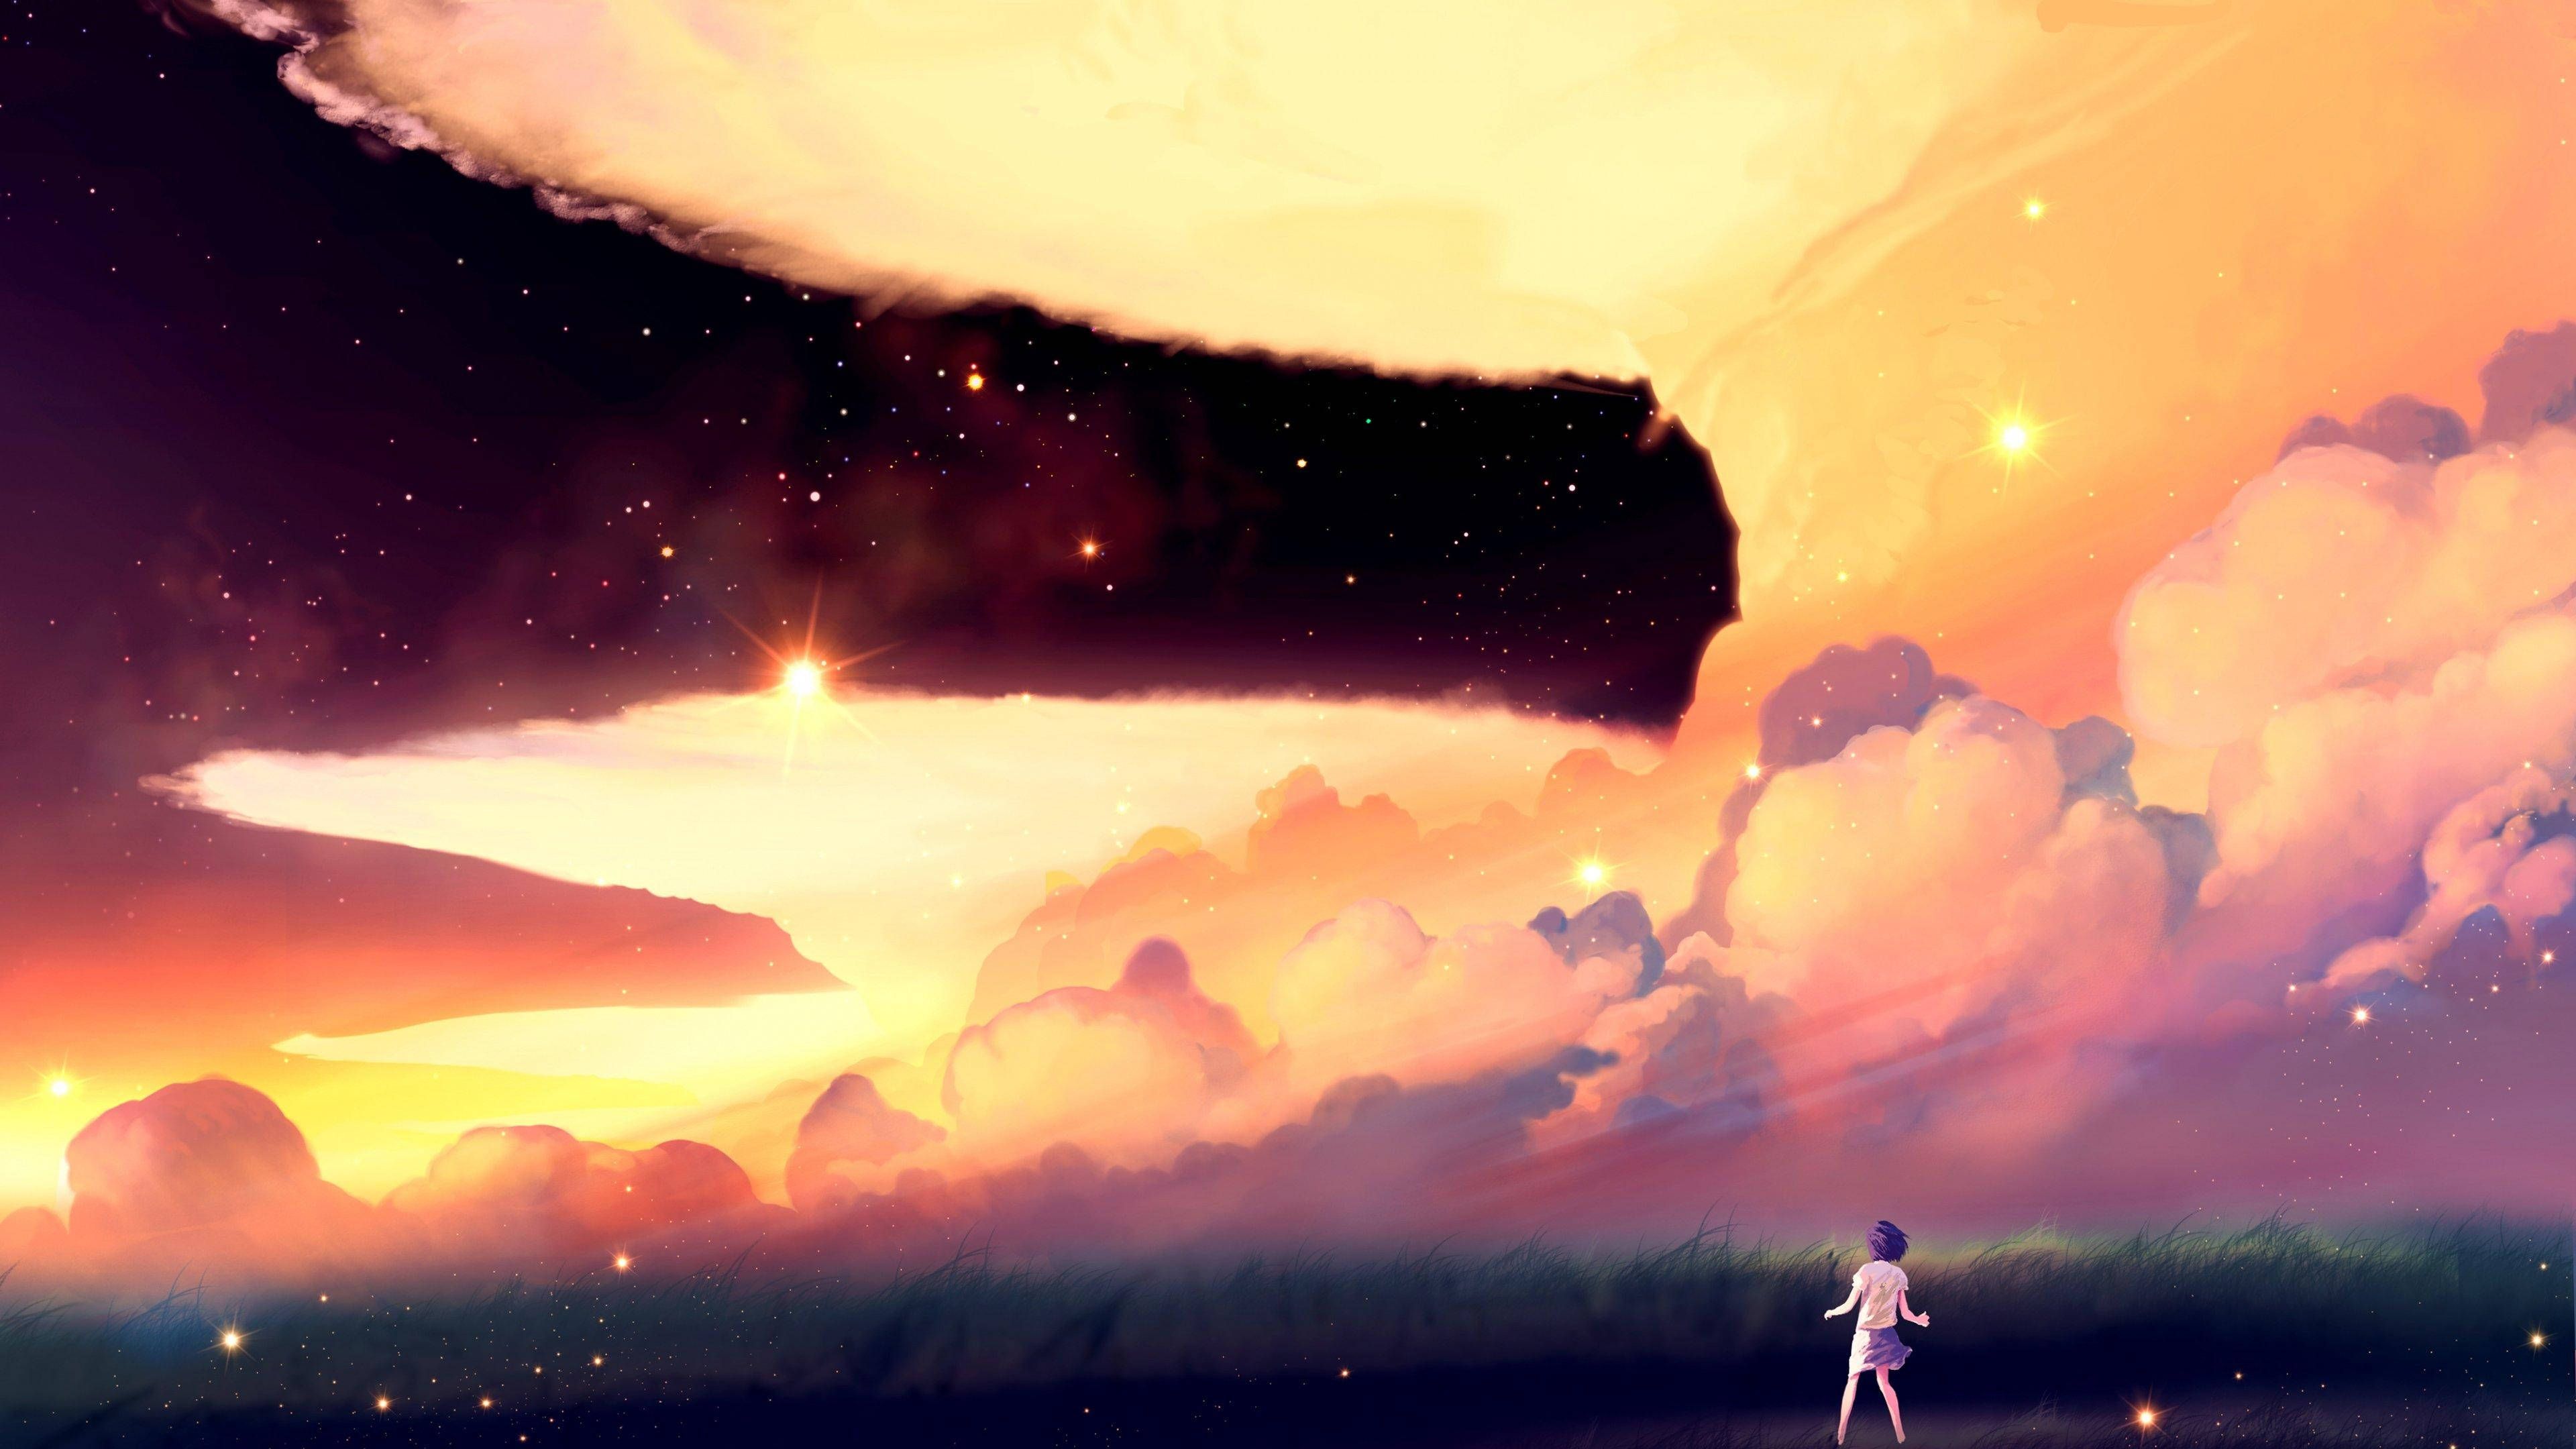 The boy is standing on the hill and looking at the stars - 3840x2160, anime sunset